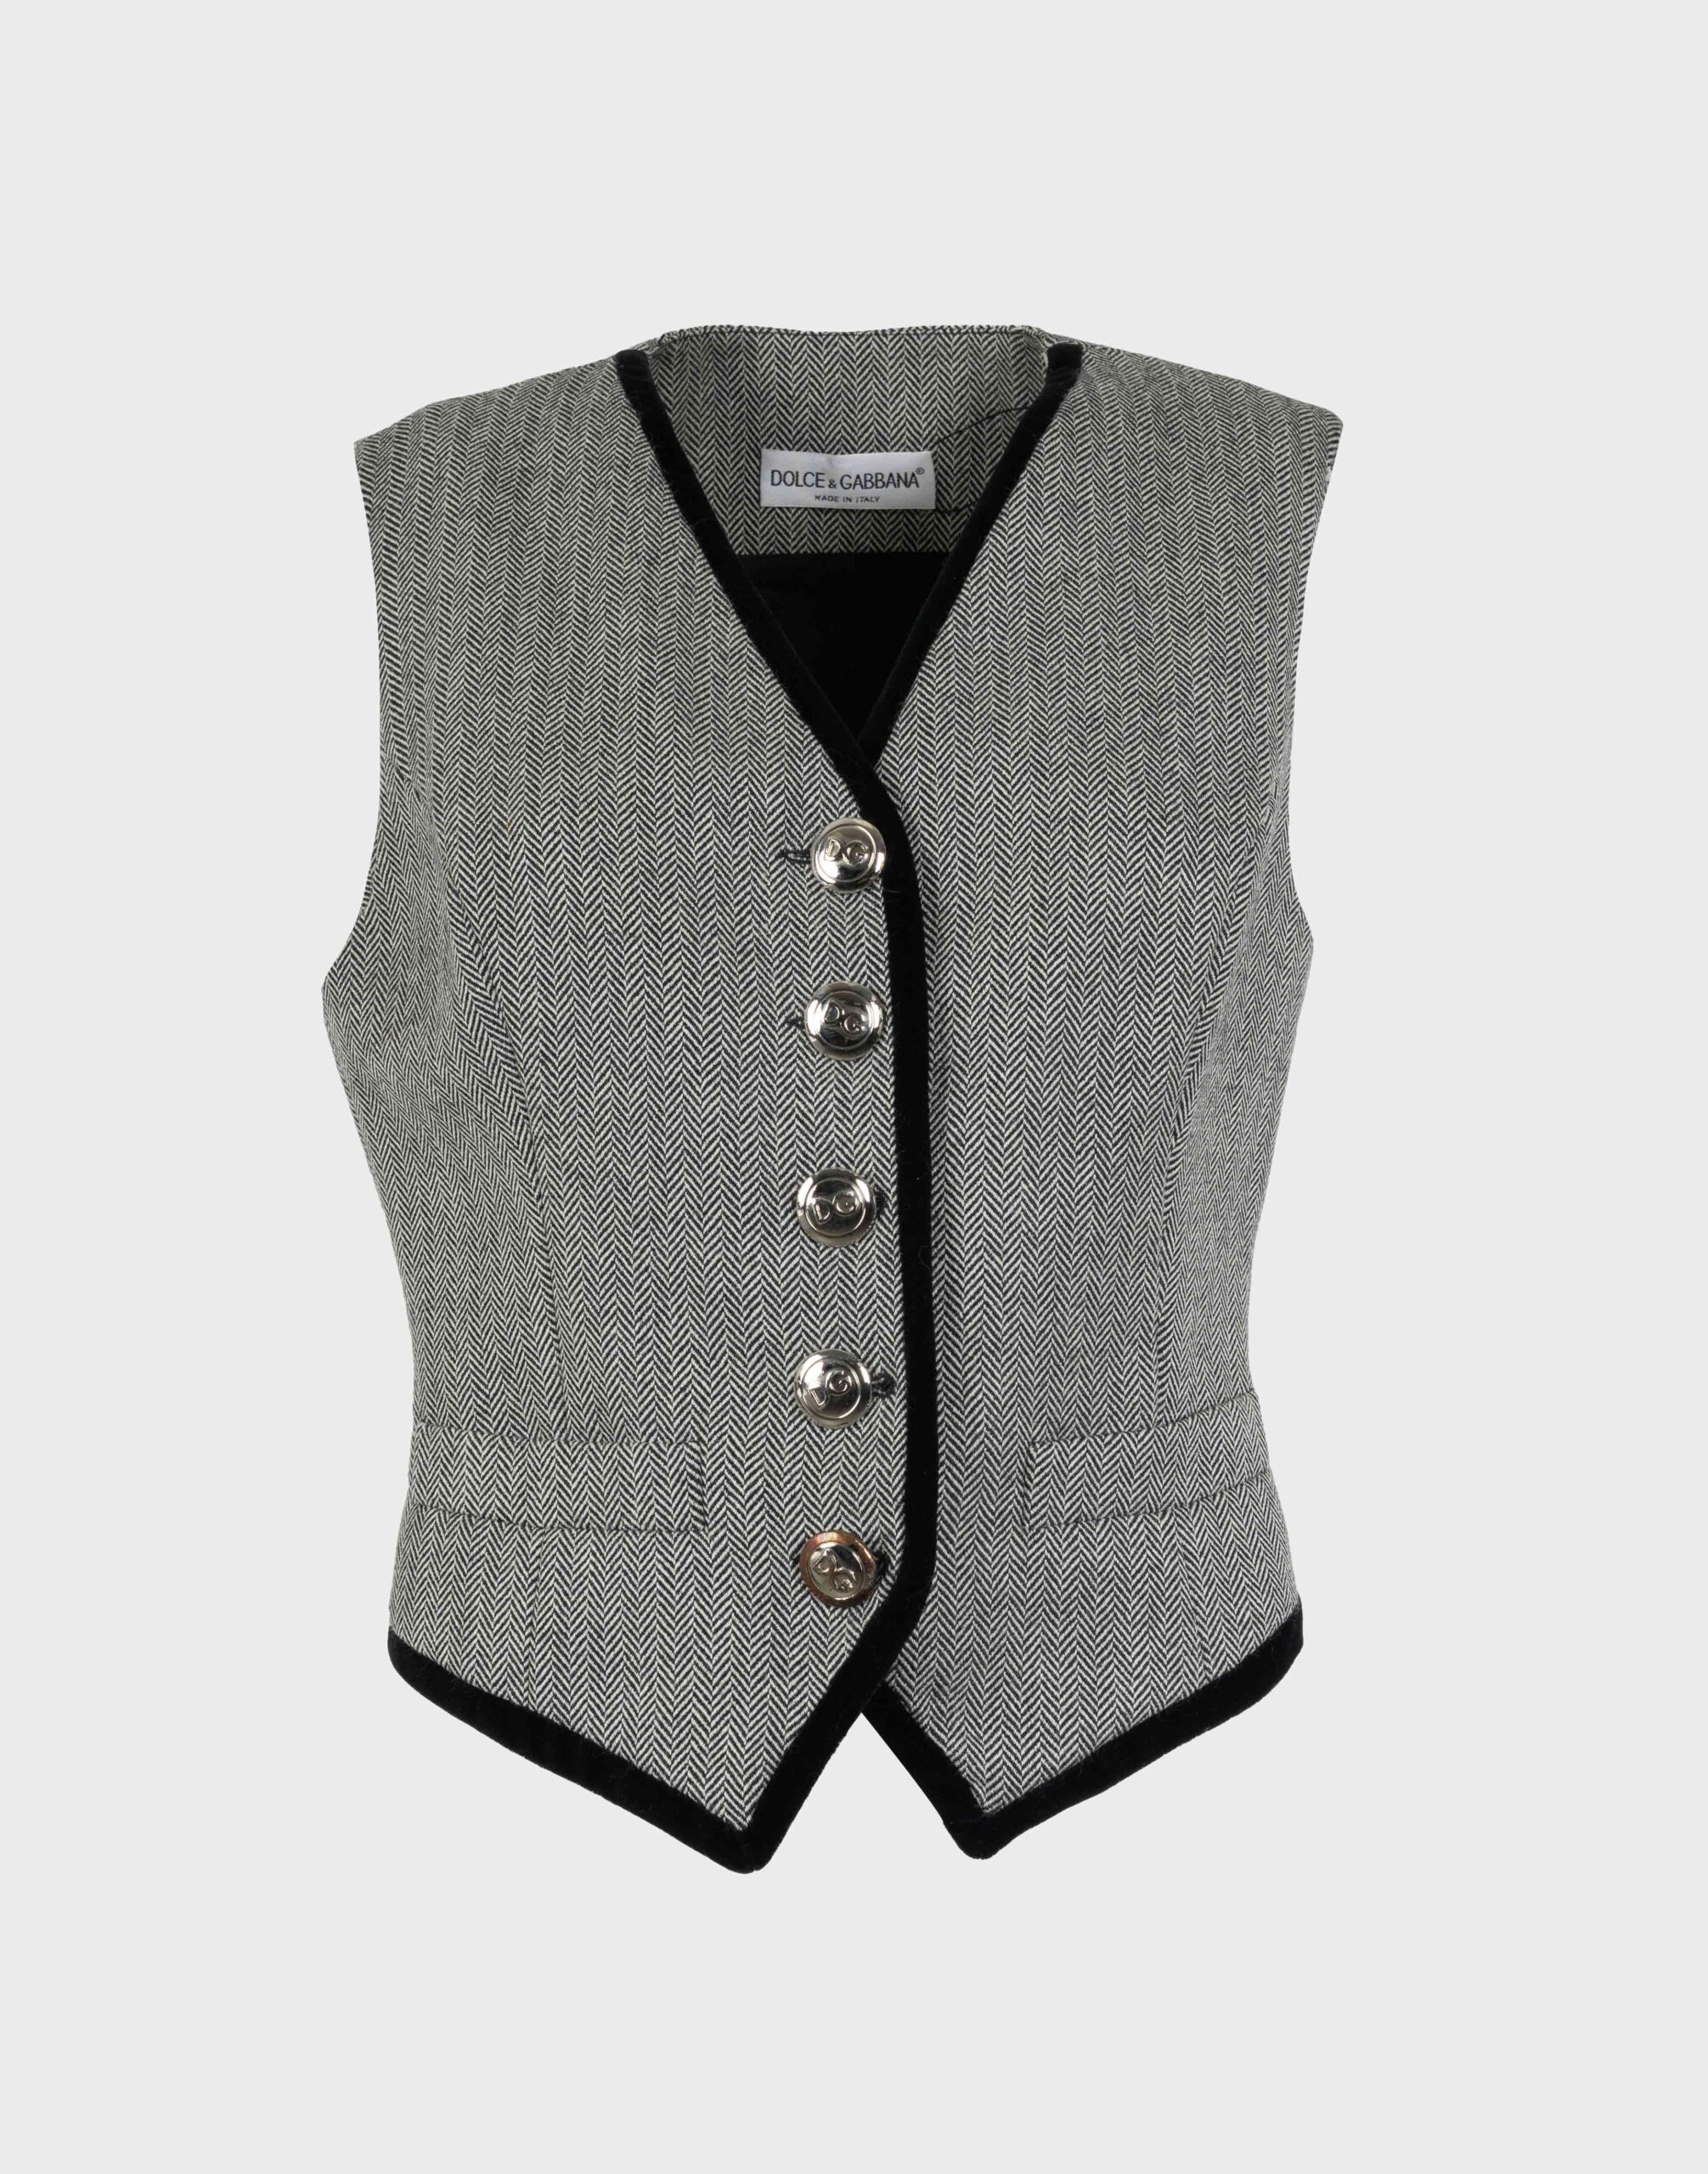 ladies' grey wool waistcoat by dolce e gabbana, with black piping detail, silver logo button fastening